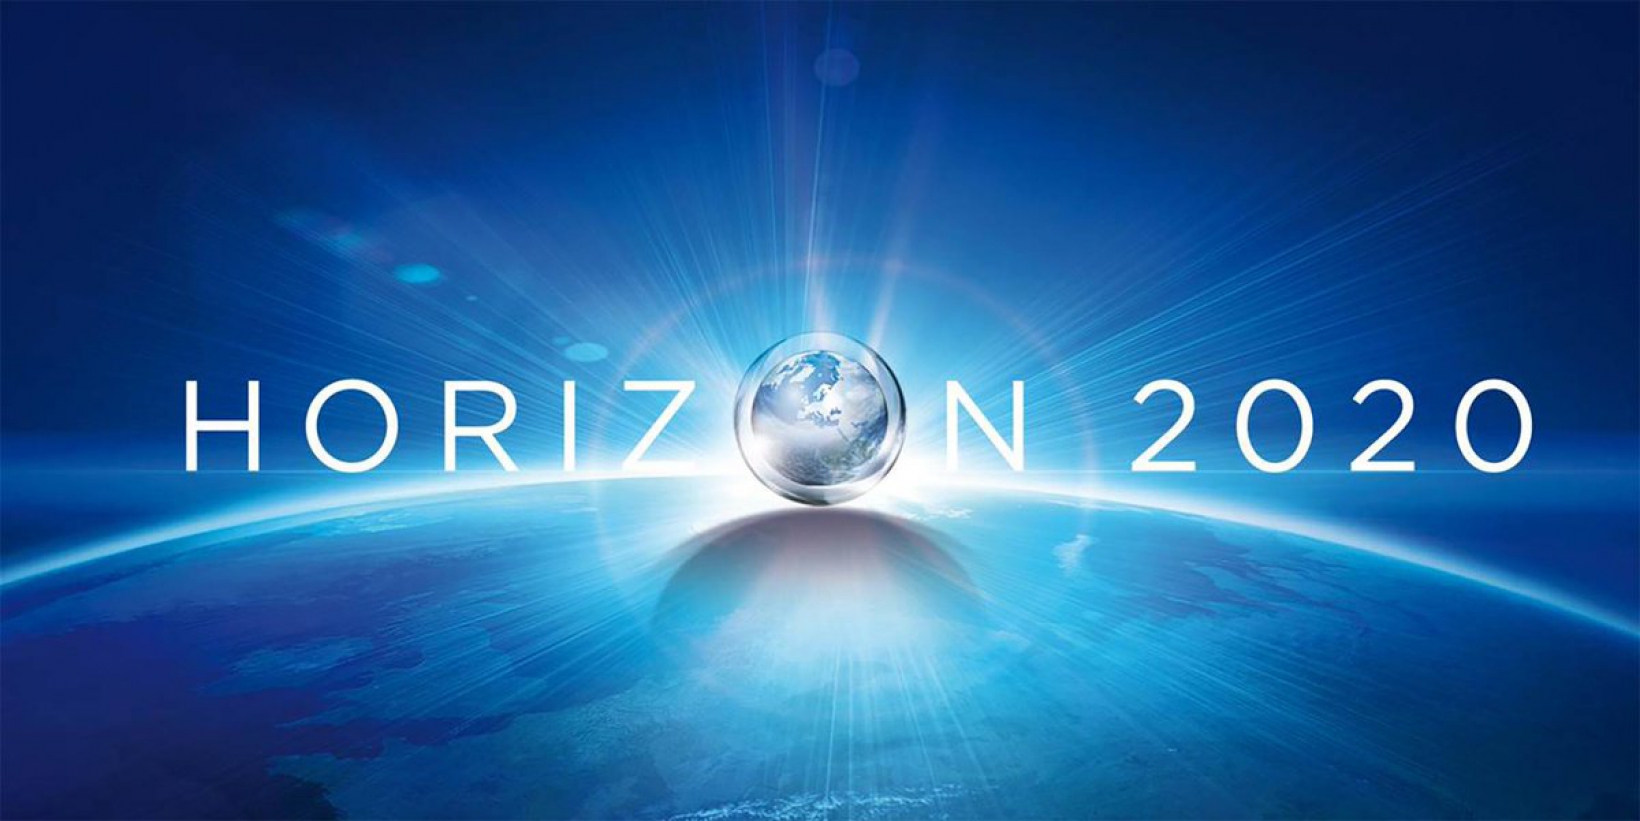 HORIZON 2020 Call for Proposals in Research and Innovative Action